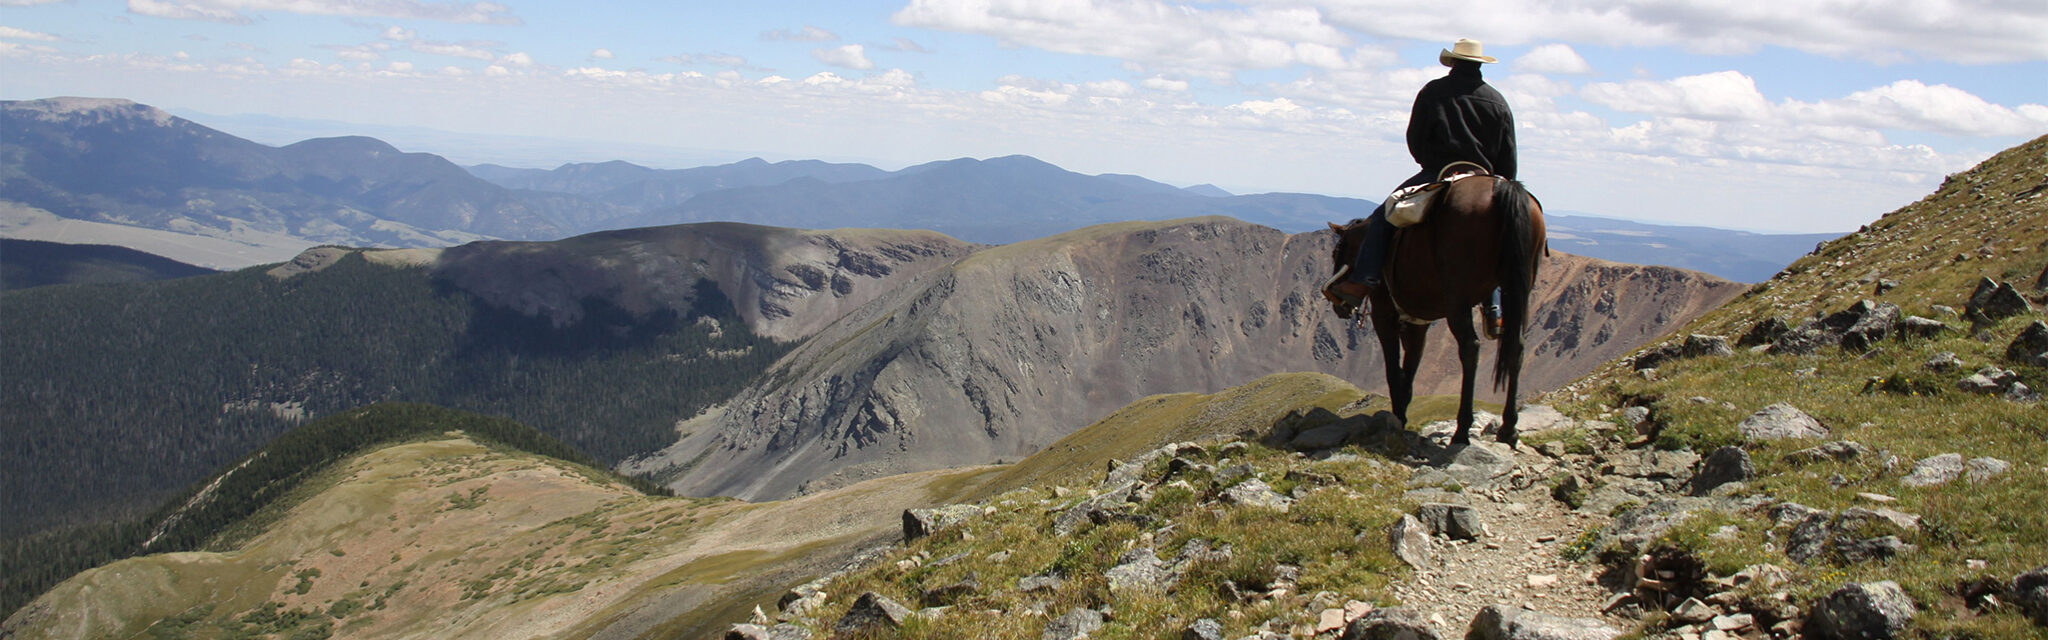 A lone horseback rider sits atop a mountain above treeline looking down at the valleys below.